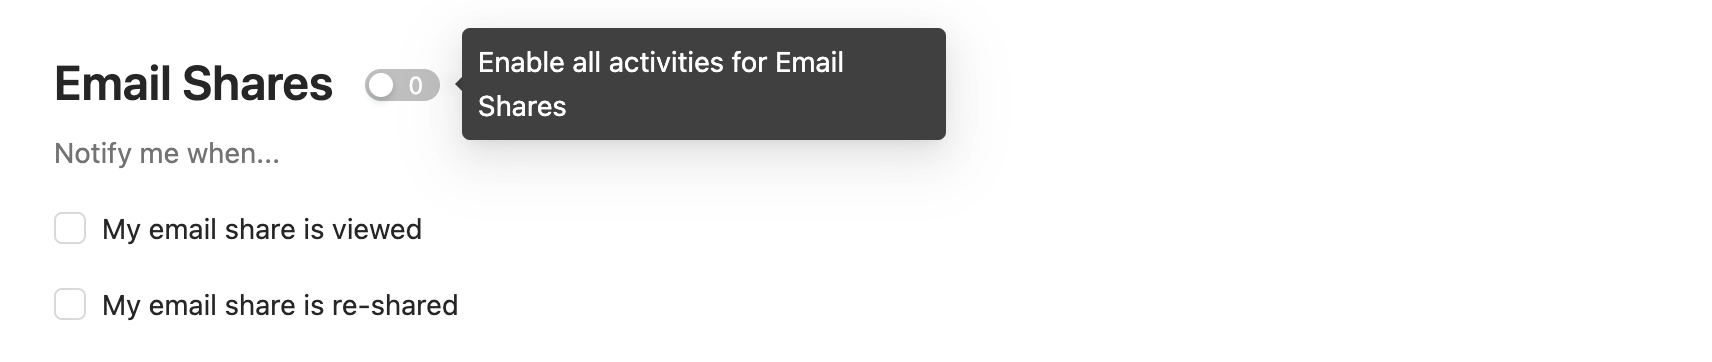 EmailShares.png